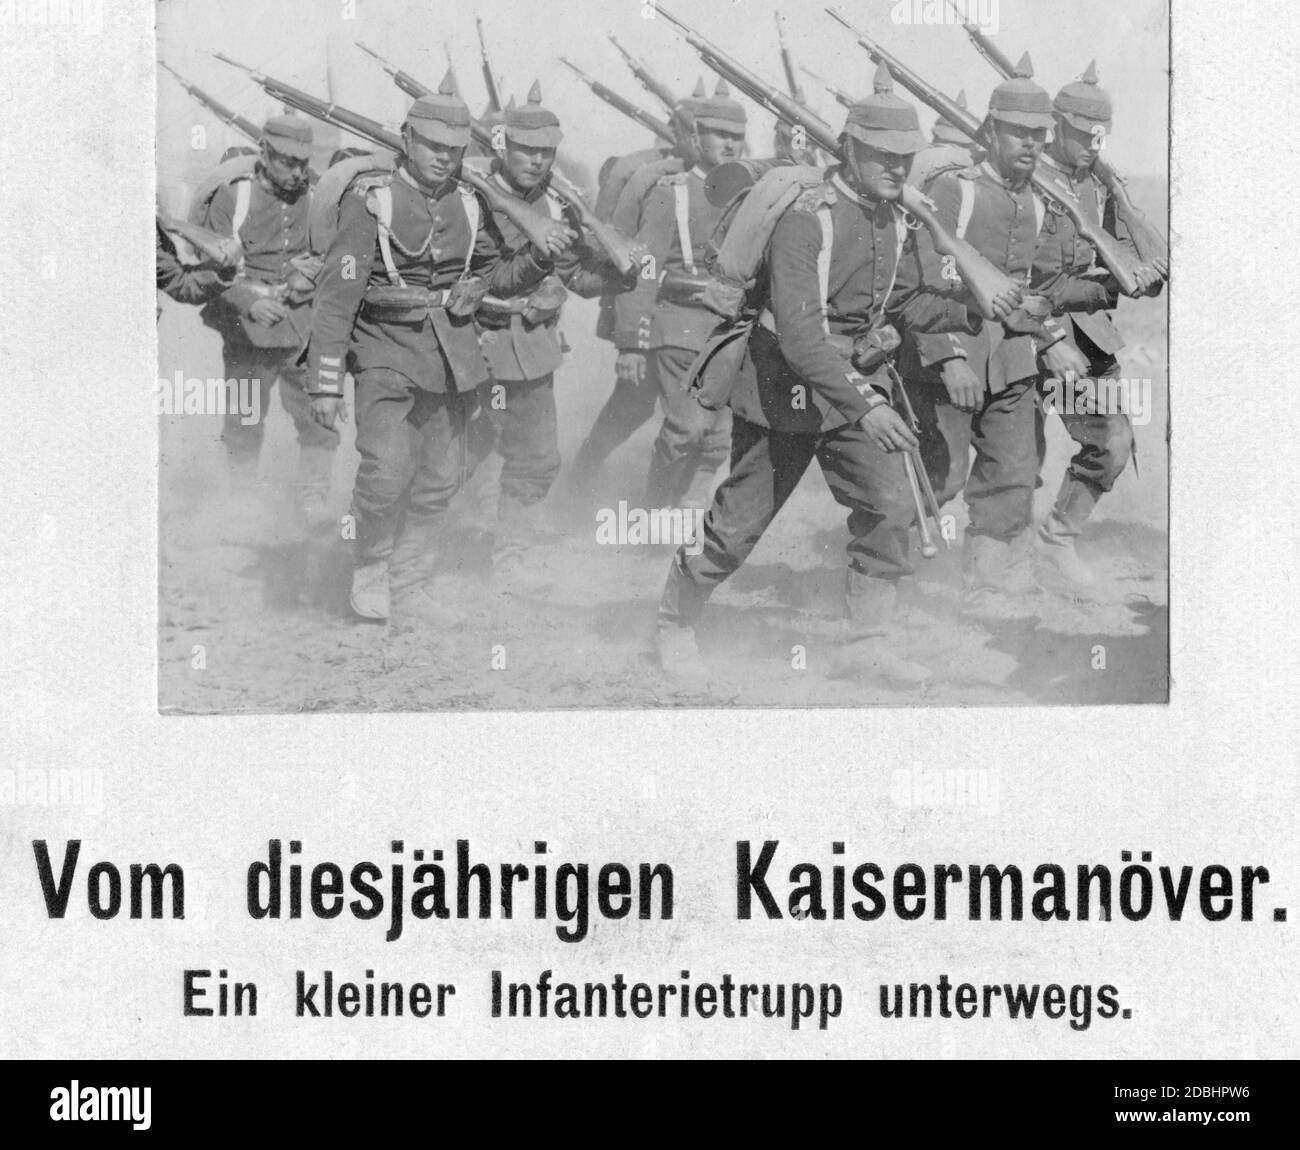 A small infantry troop during the annual imperial manoeuvre of the German army before the First World War. Stock Photo